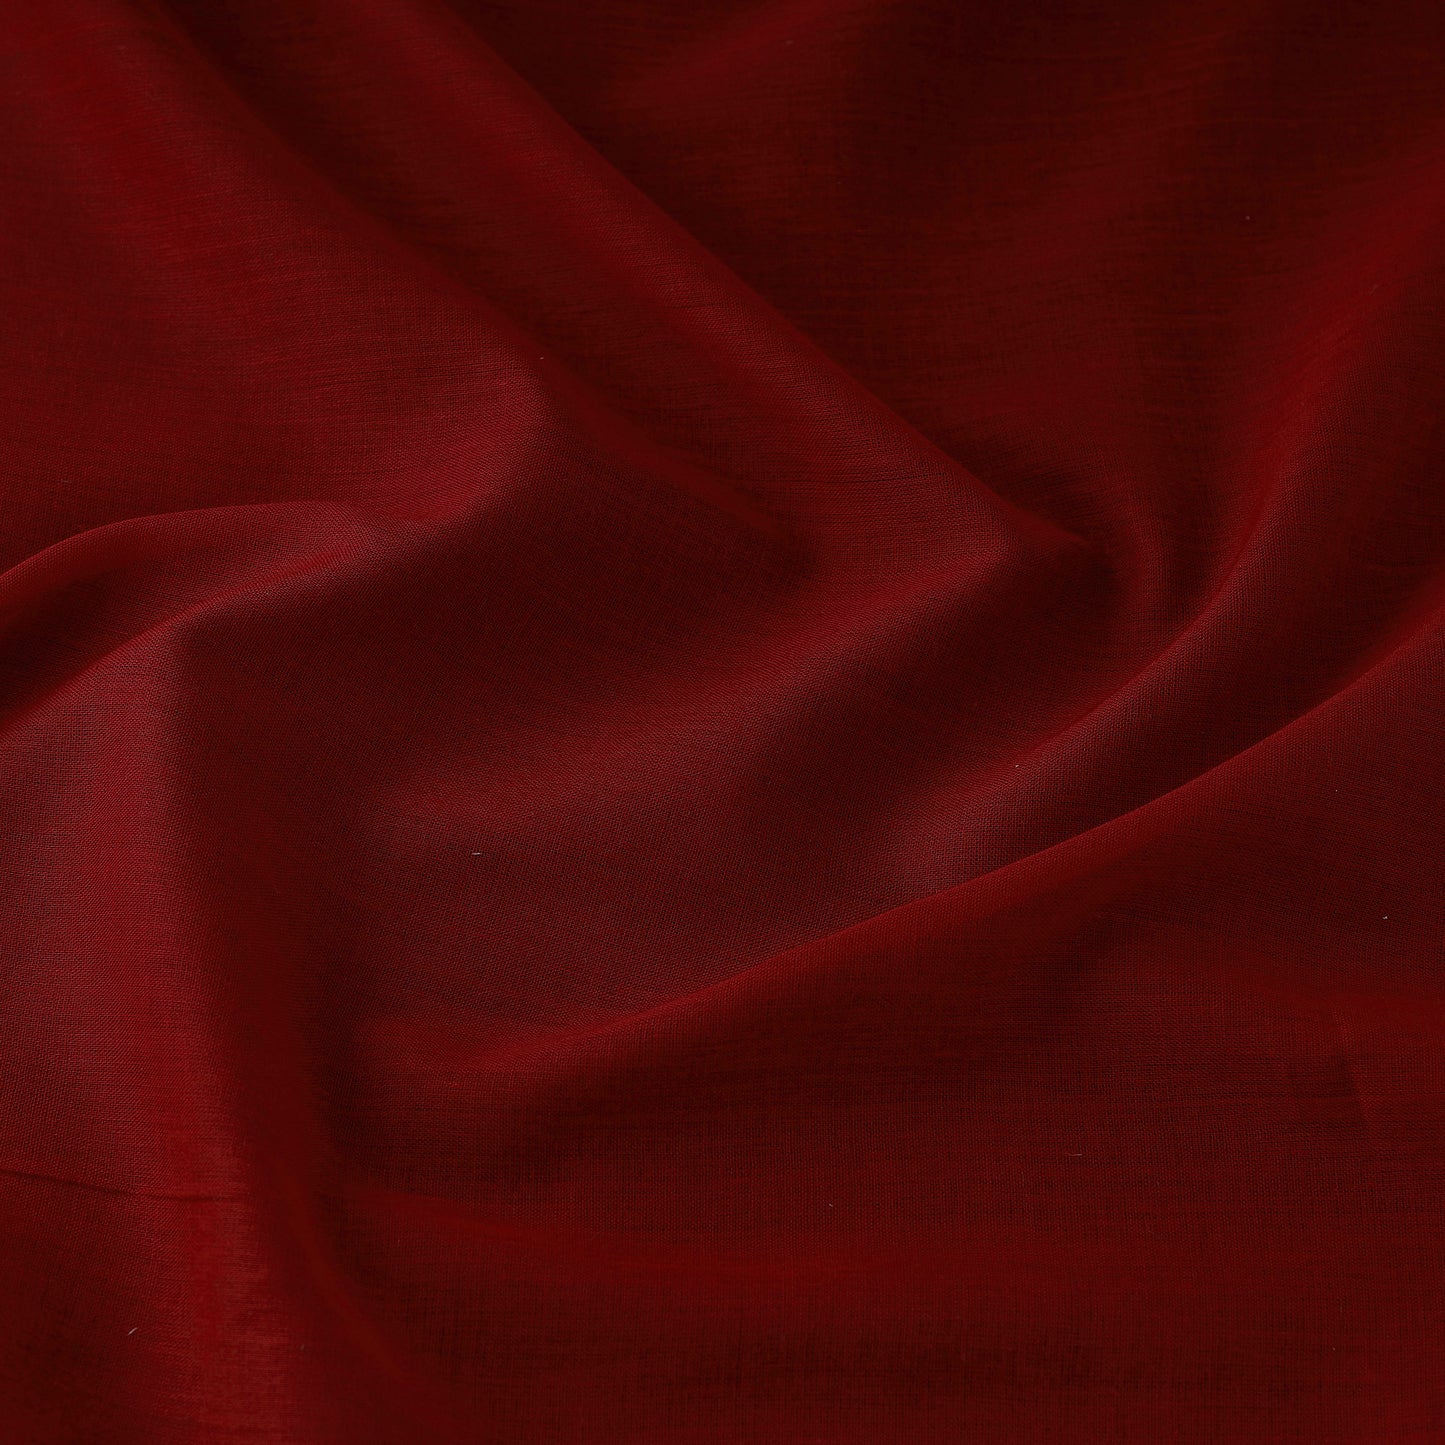 Red - Prewashed Plain Dyed Cotton Fabric 63